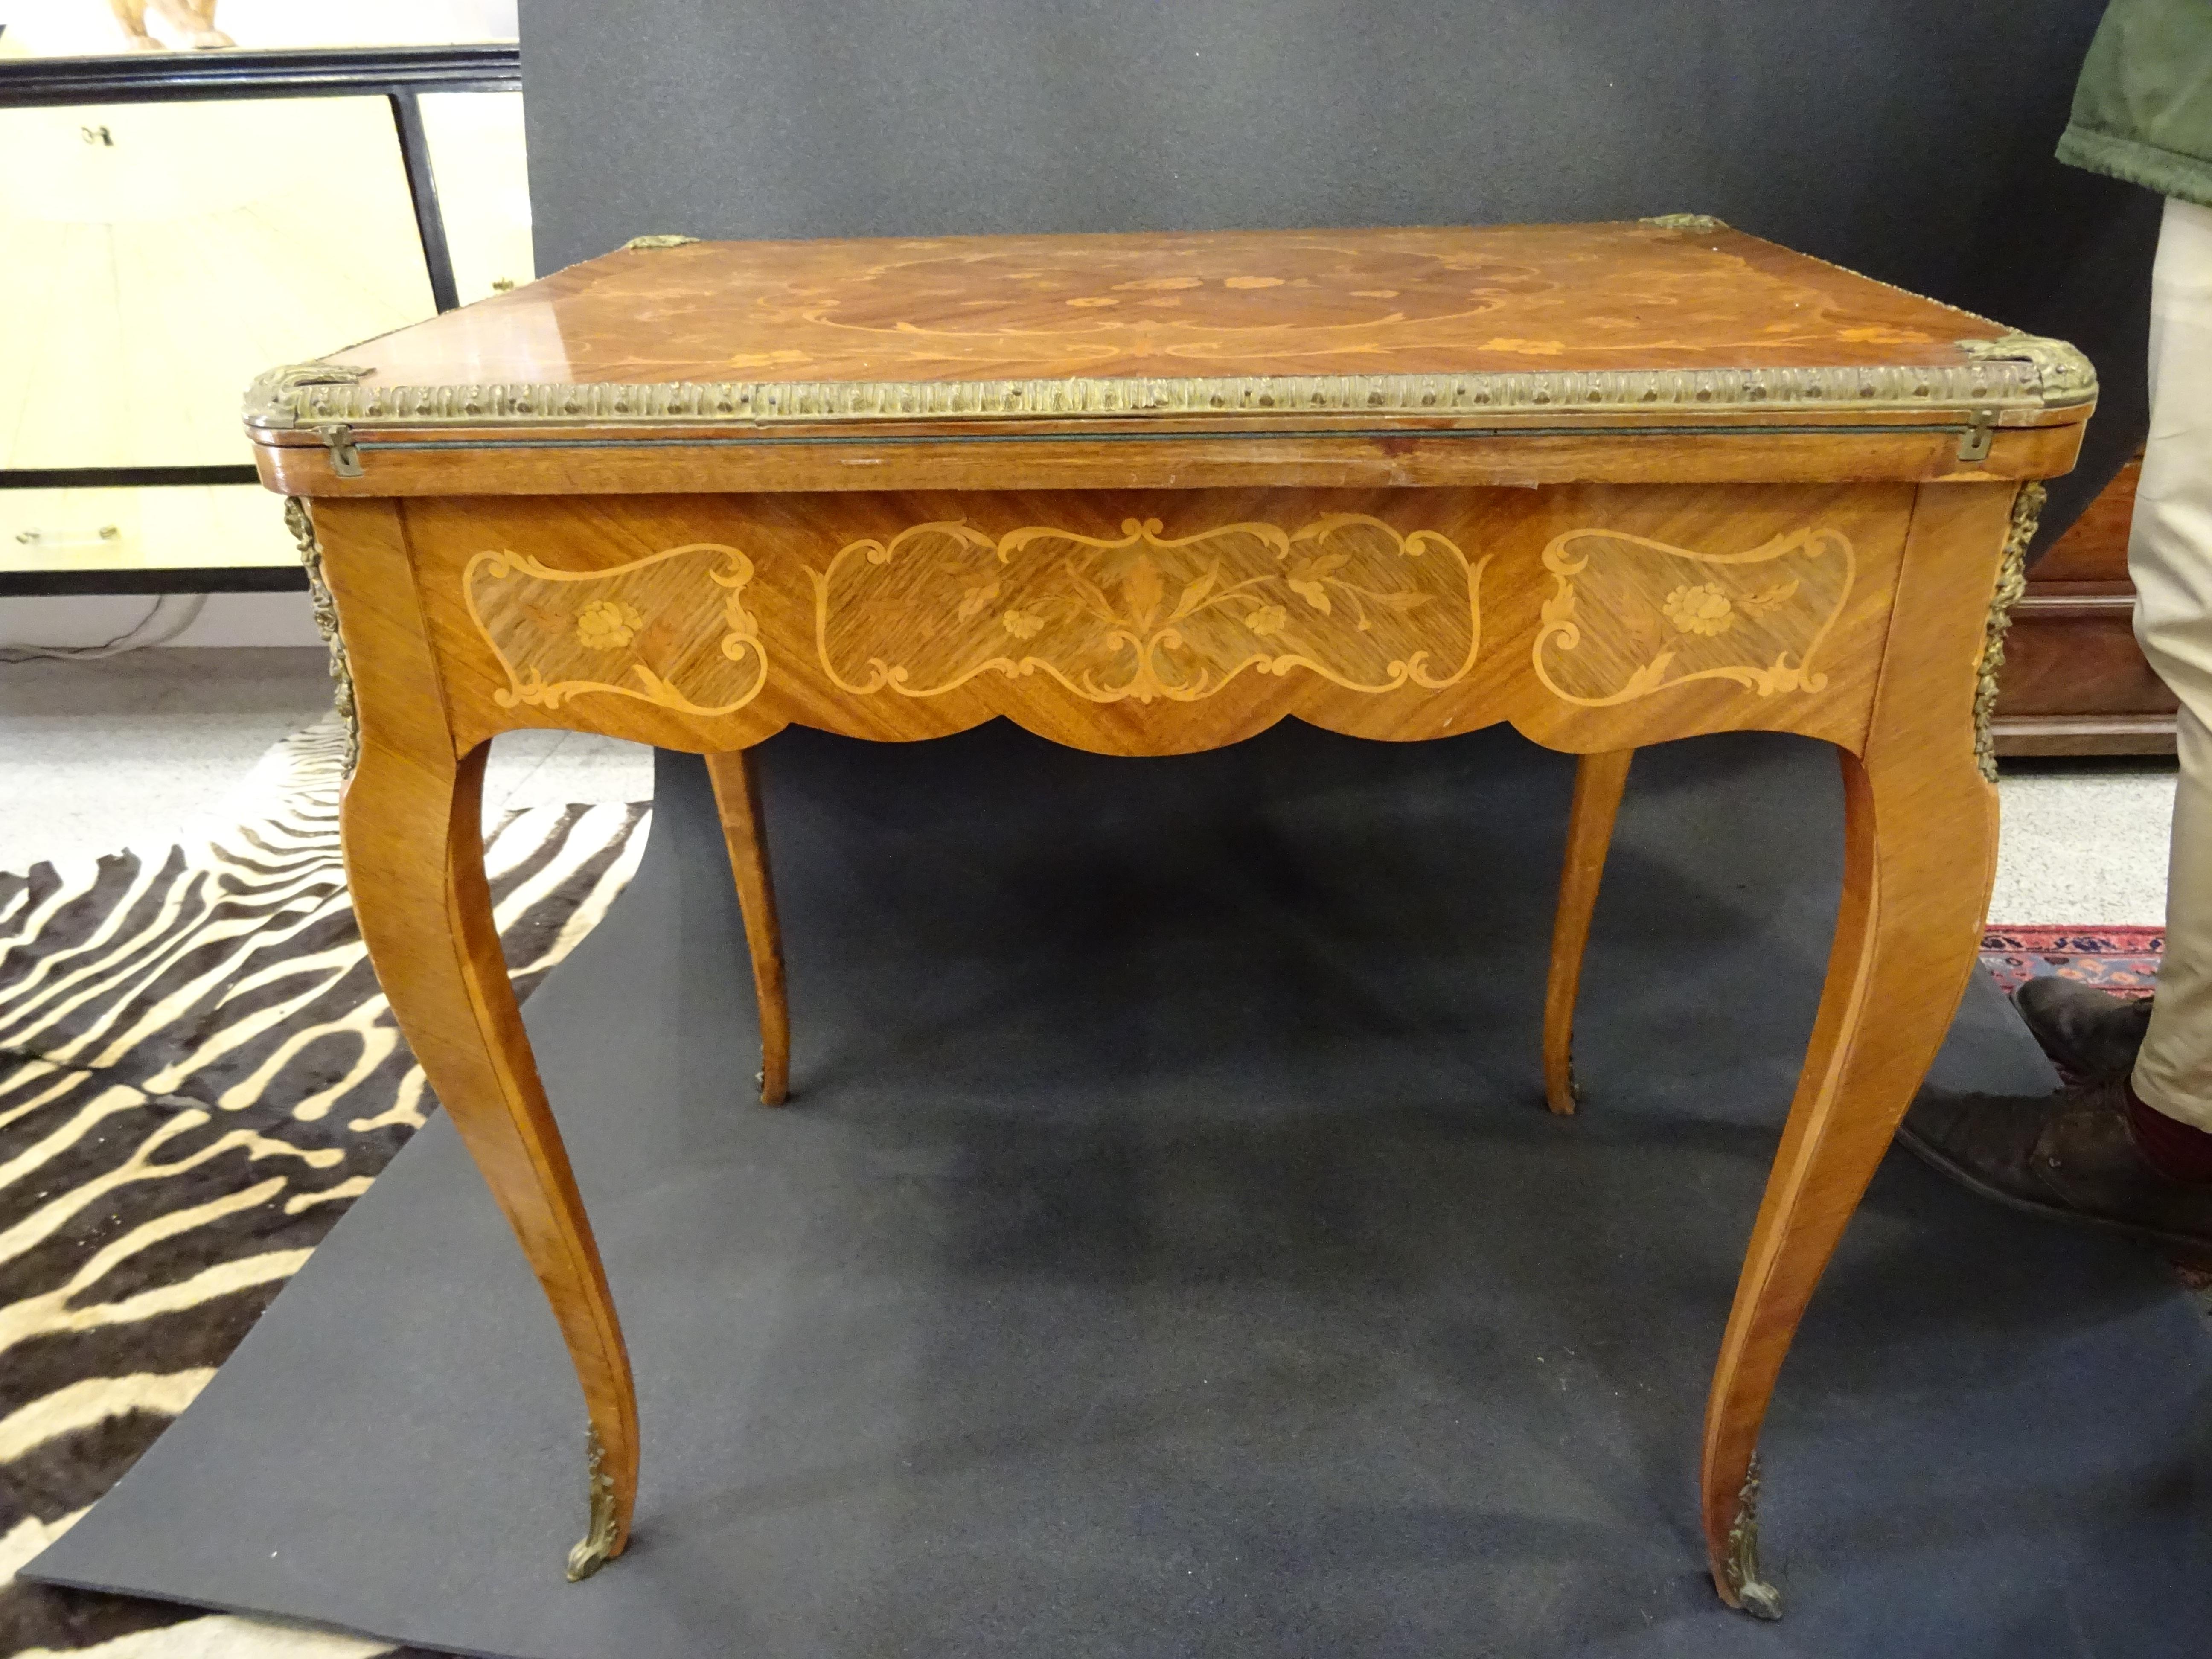 Amazing game table or card table in inlaid wood with flowers and garlands, embellished with bronzes in all the contour as well as the flaps of the legs. It has a drawer and turning it opens to use it for the use it is prefered.
In a very good